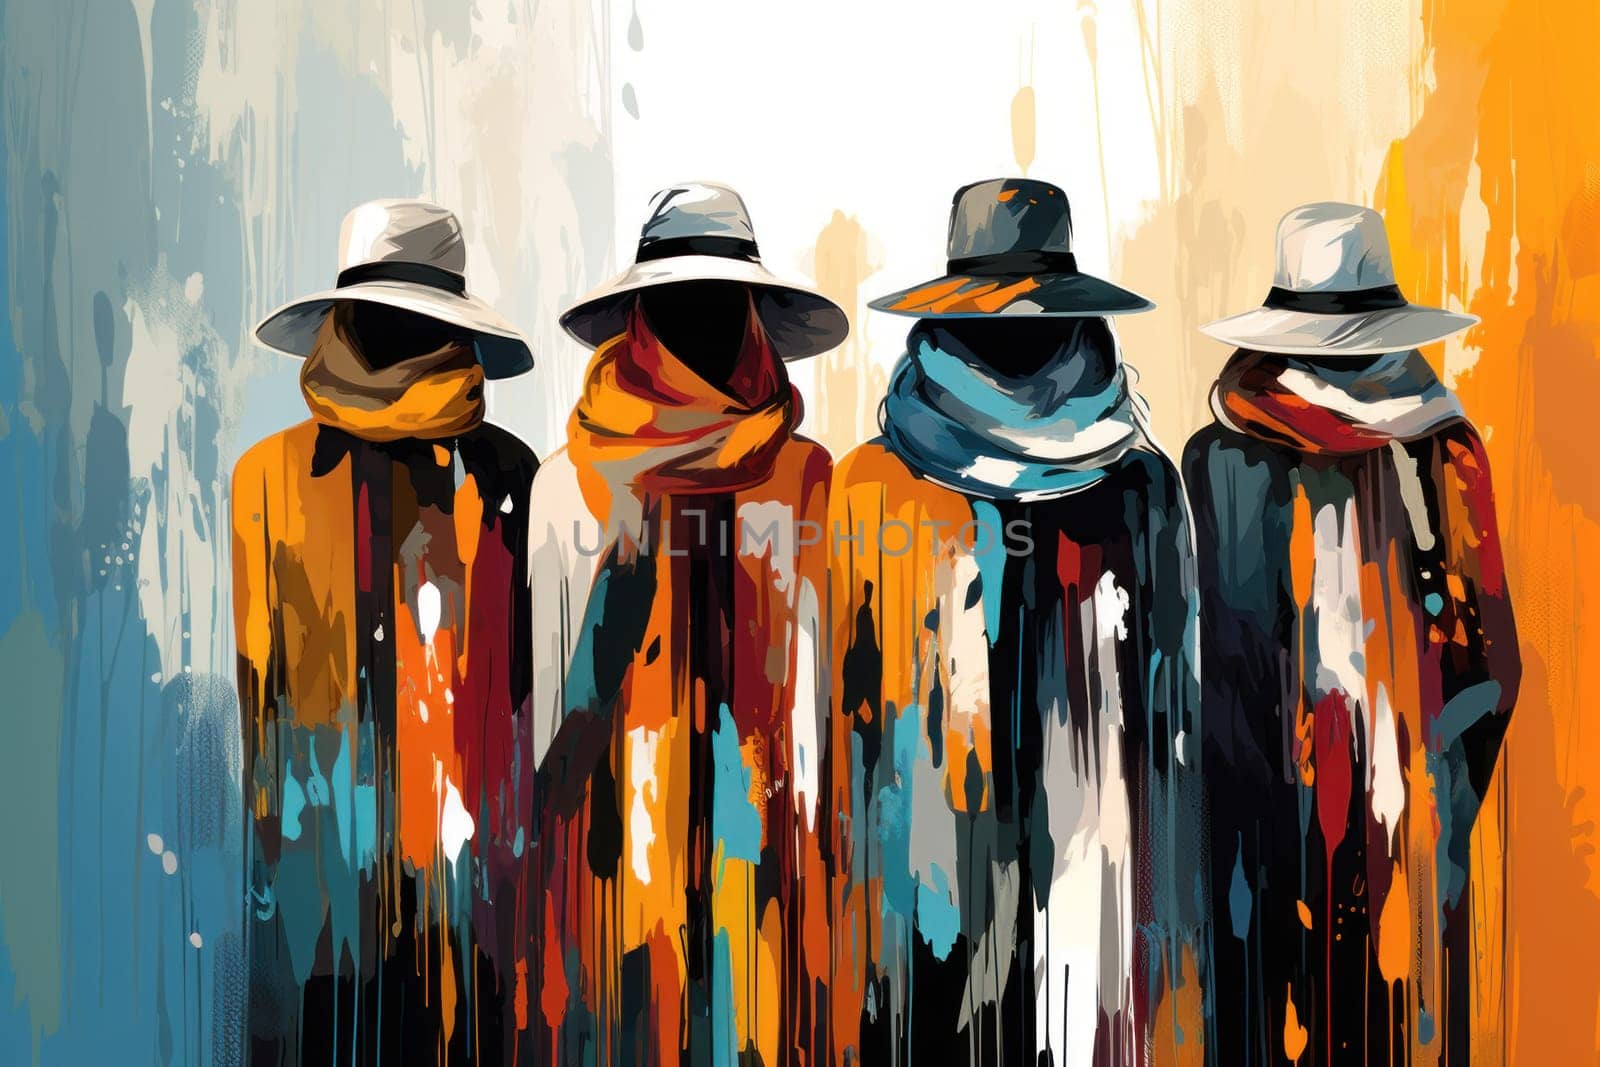 A chic portrayal of the winter season's fashion, highlighting stylish winter attire, including scarves, hats, and coats. This composition captures the elegance and coziness of winter wardrobe.